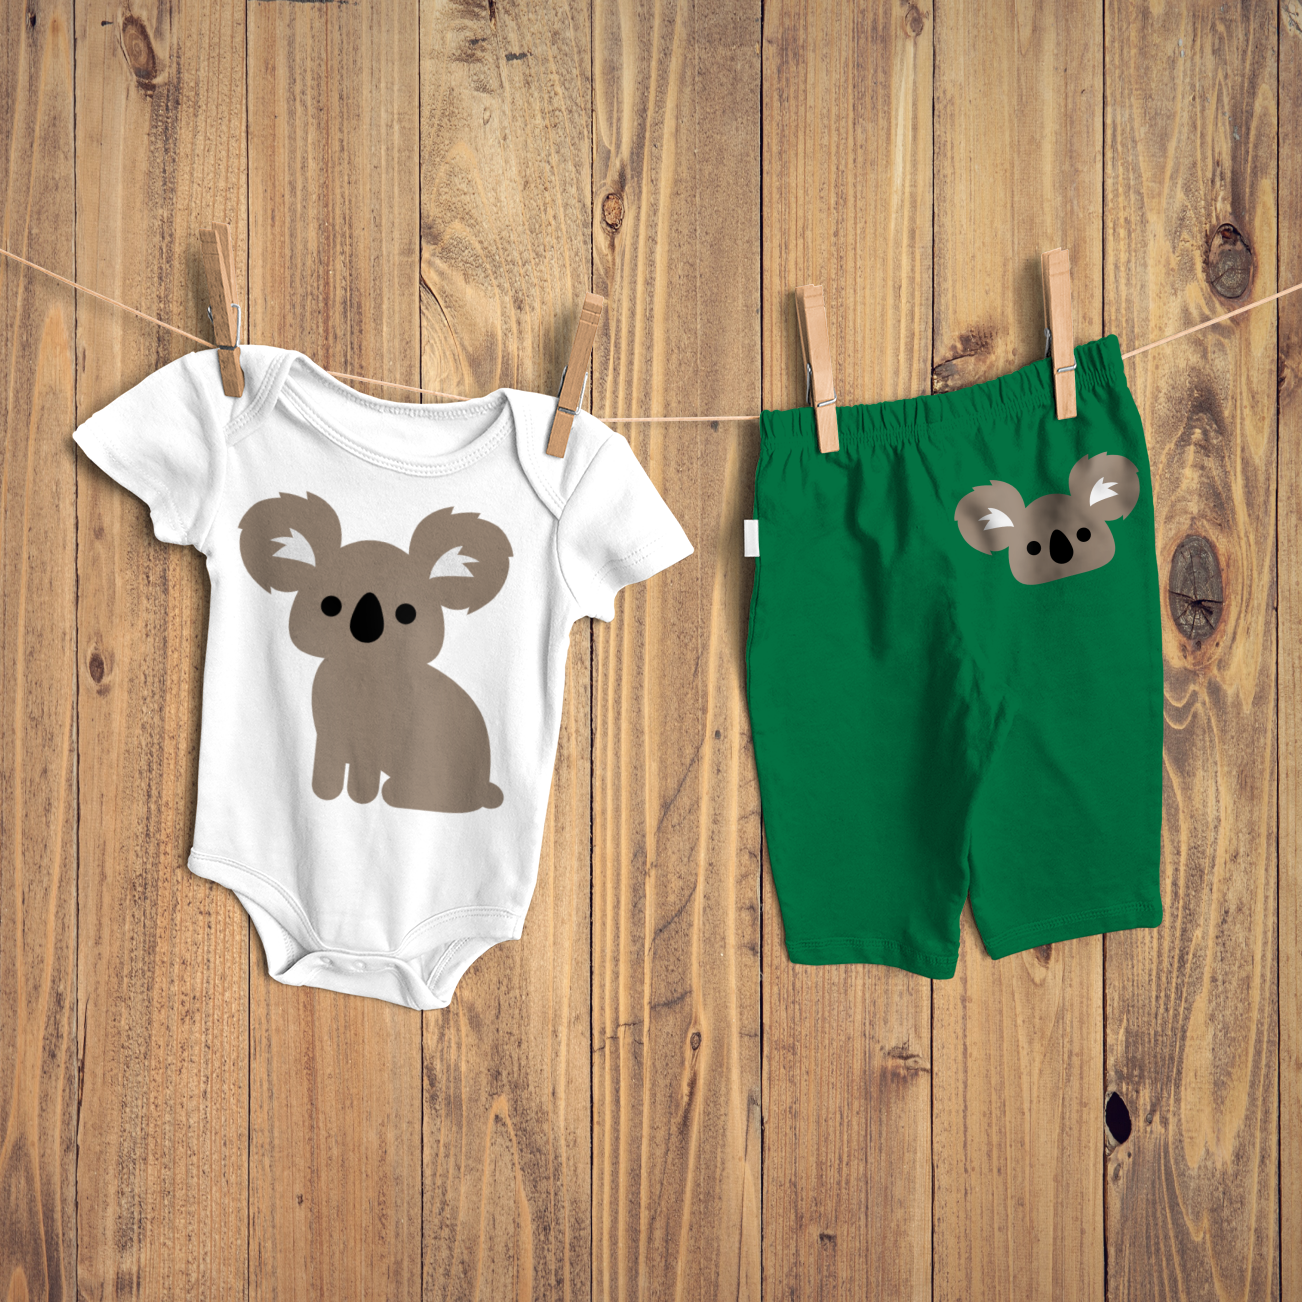 Onesie with a koala design, and baby pants with a koala face design.